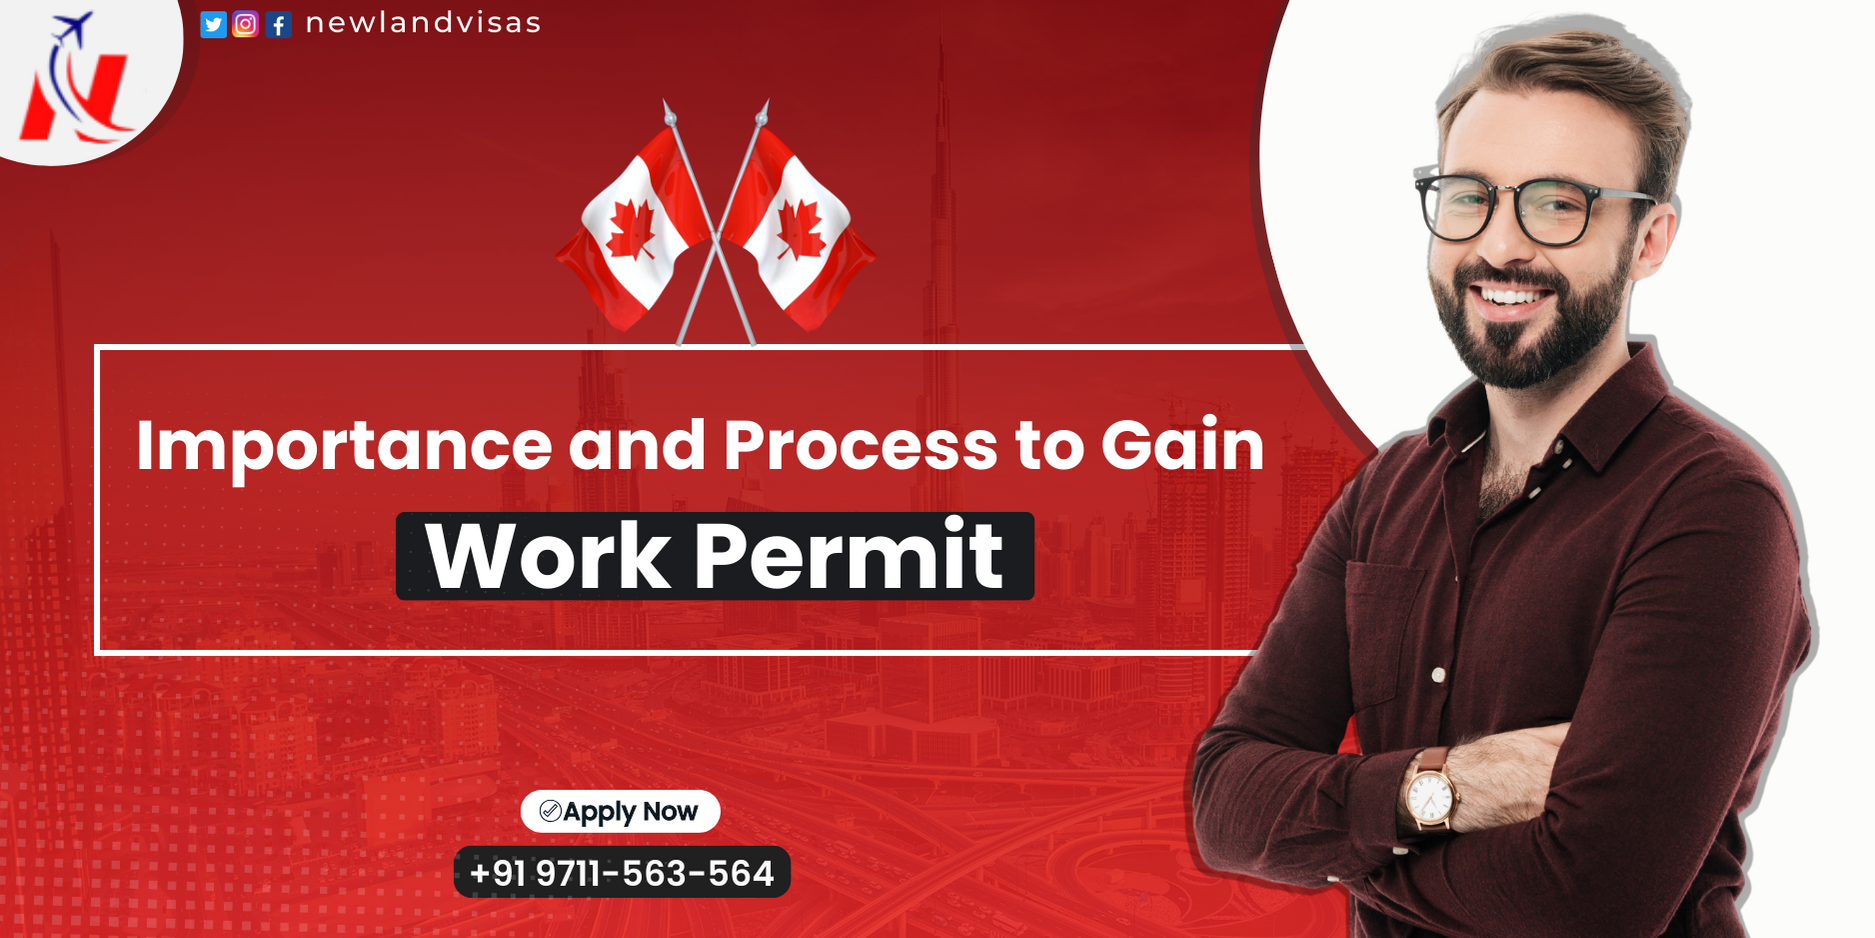 Importance and Process to Gain Work Permit